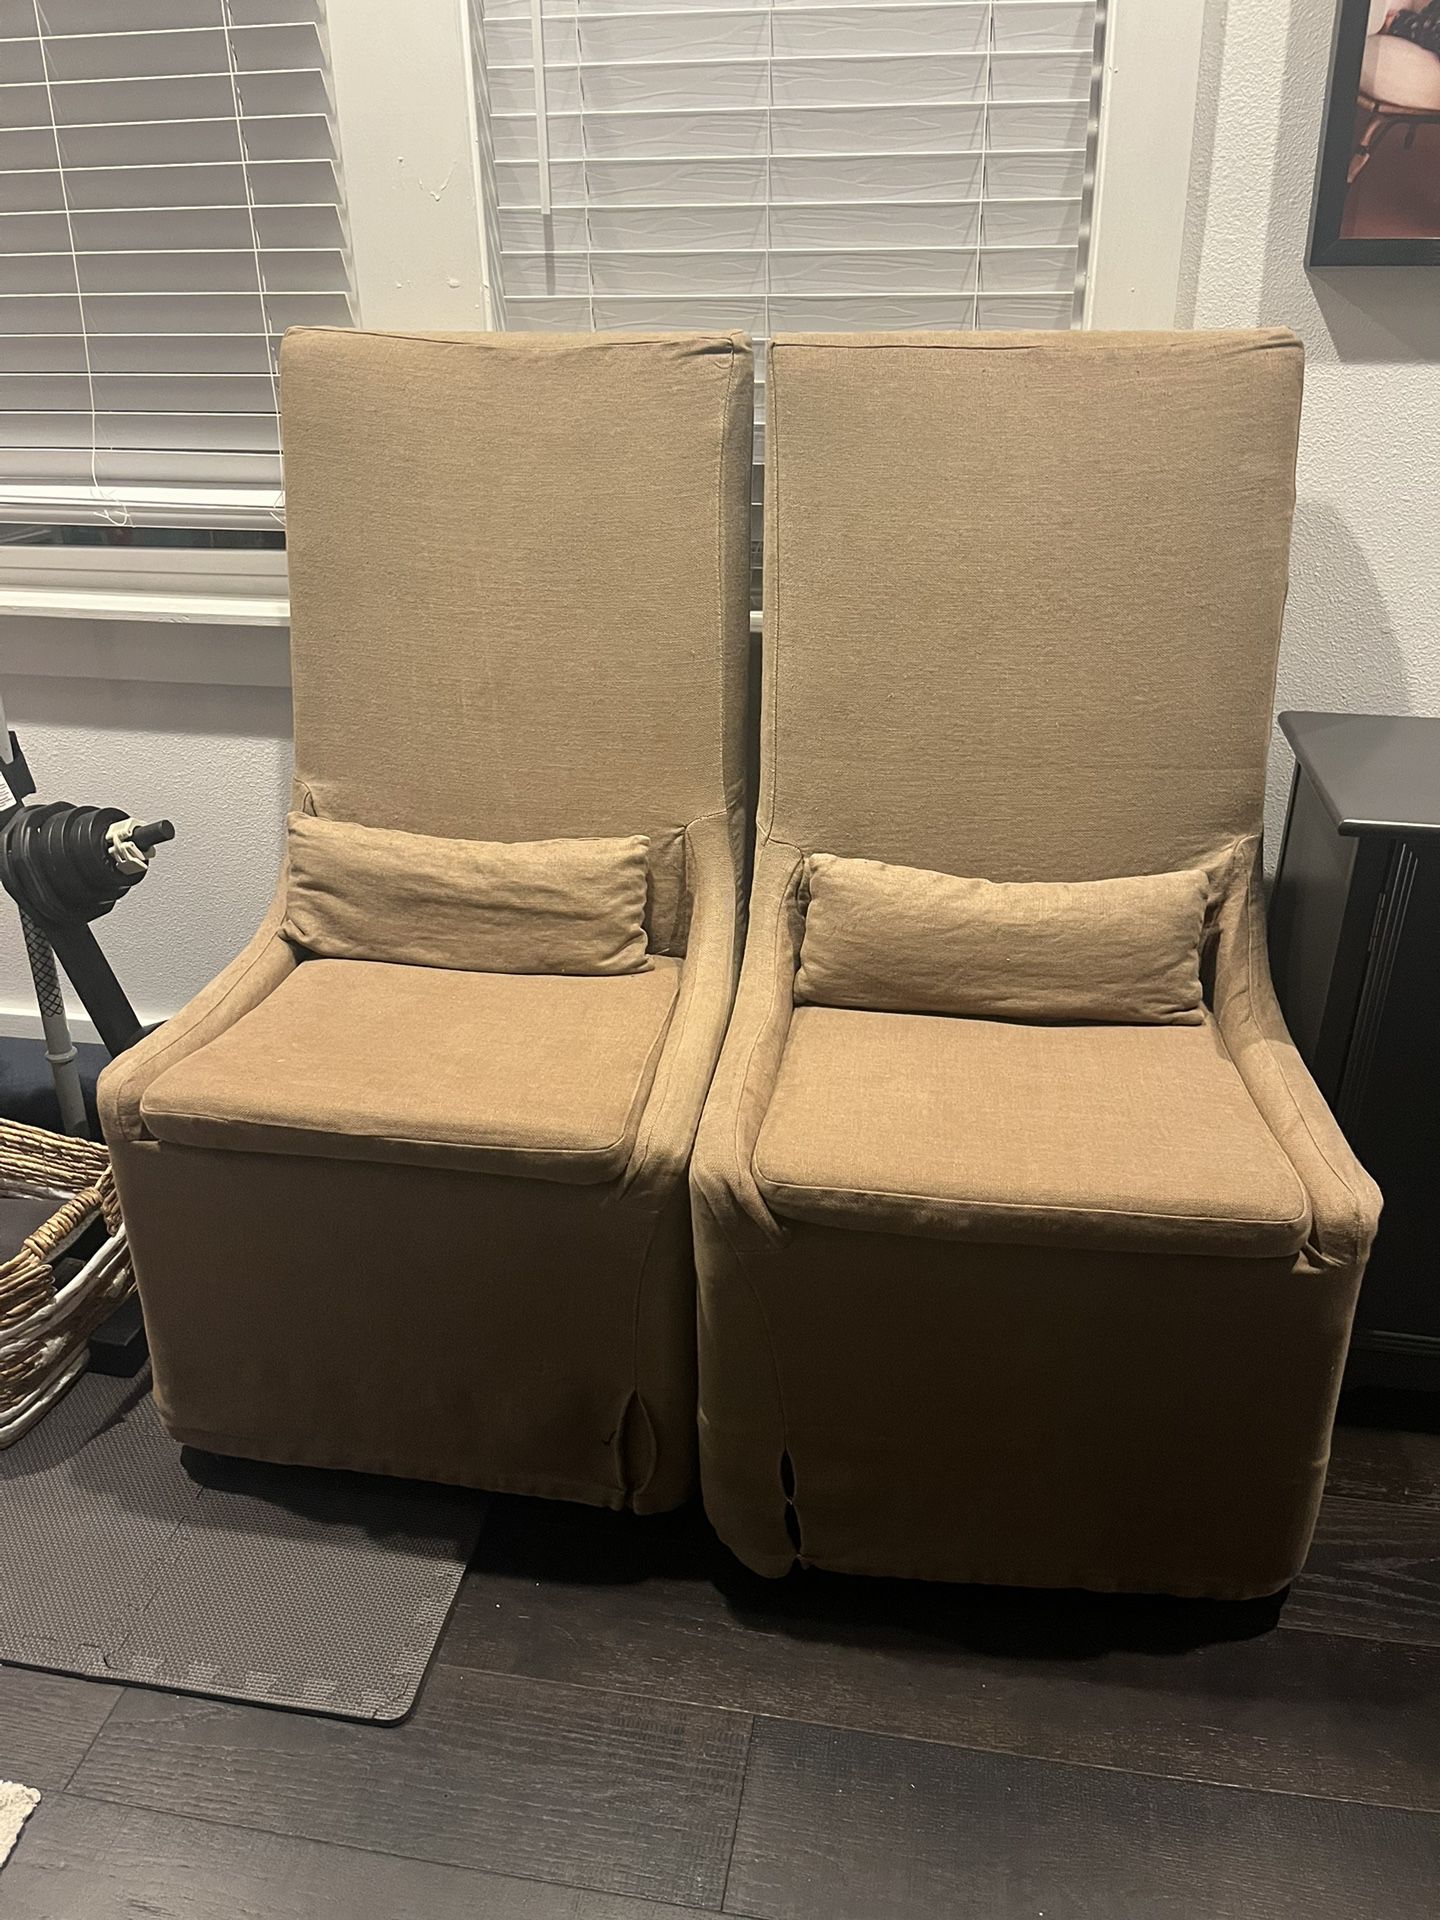 Two Cloth Covered Dinning Room Chairs 